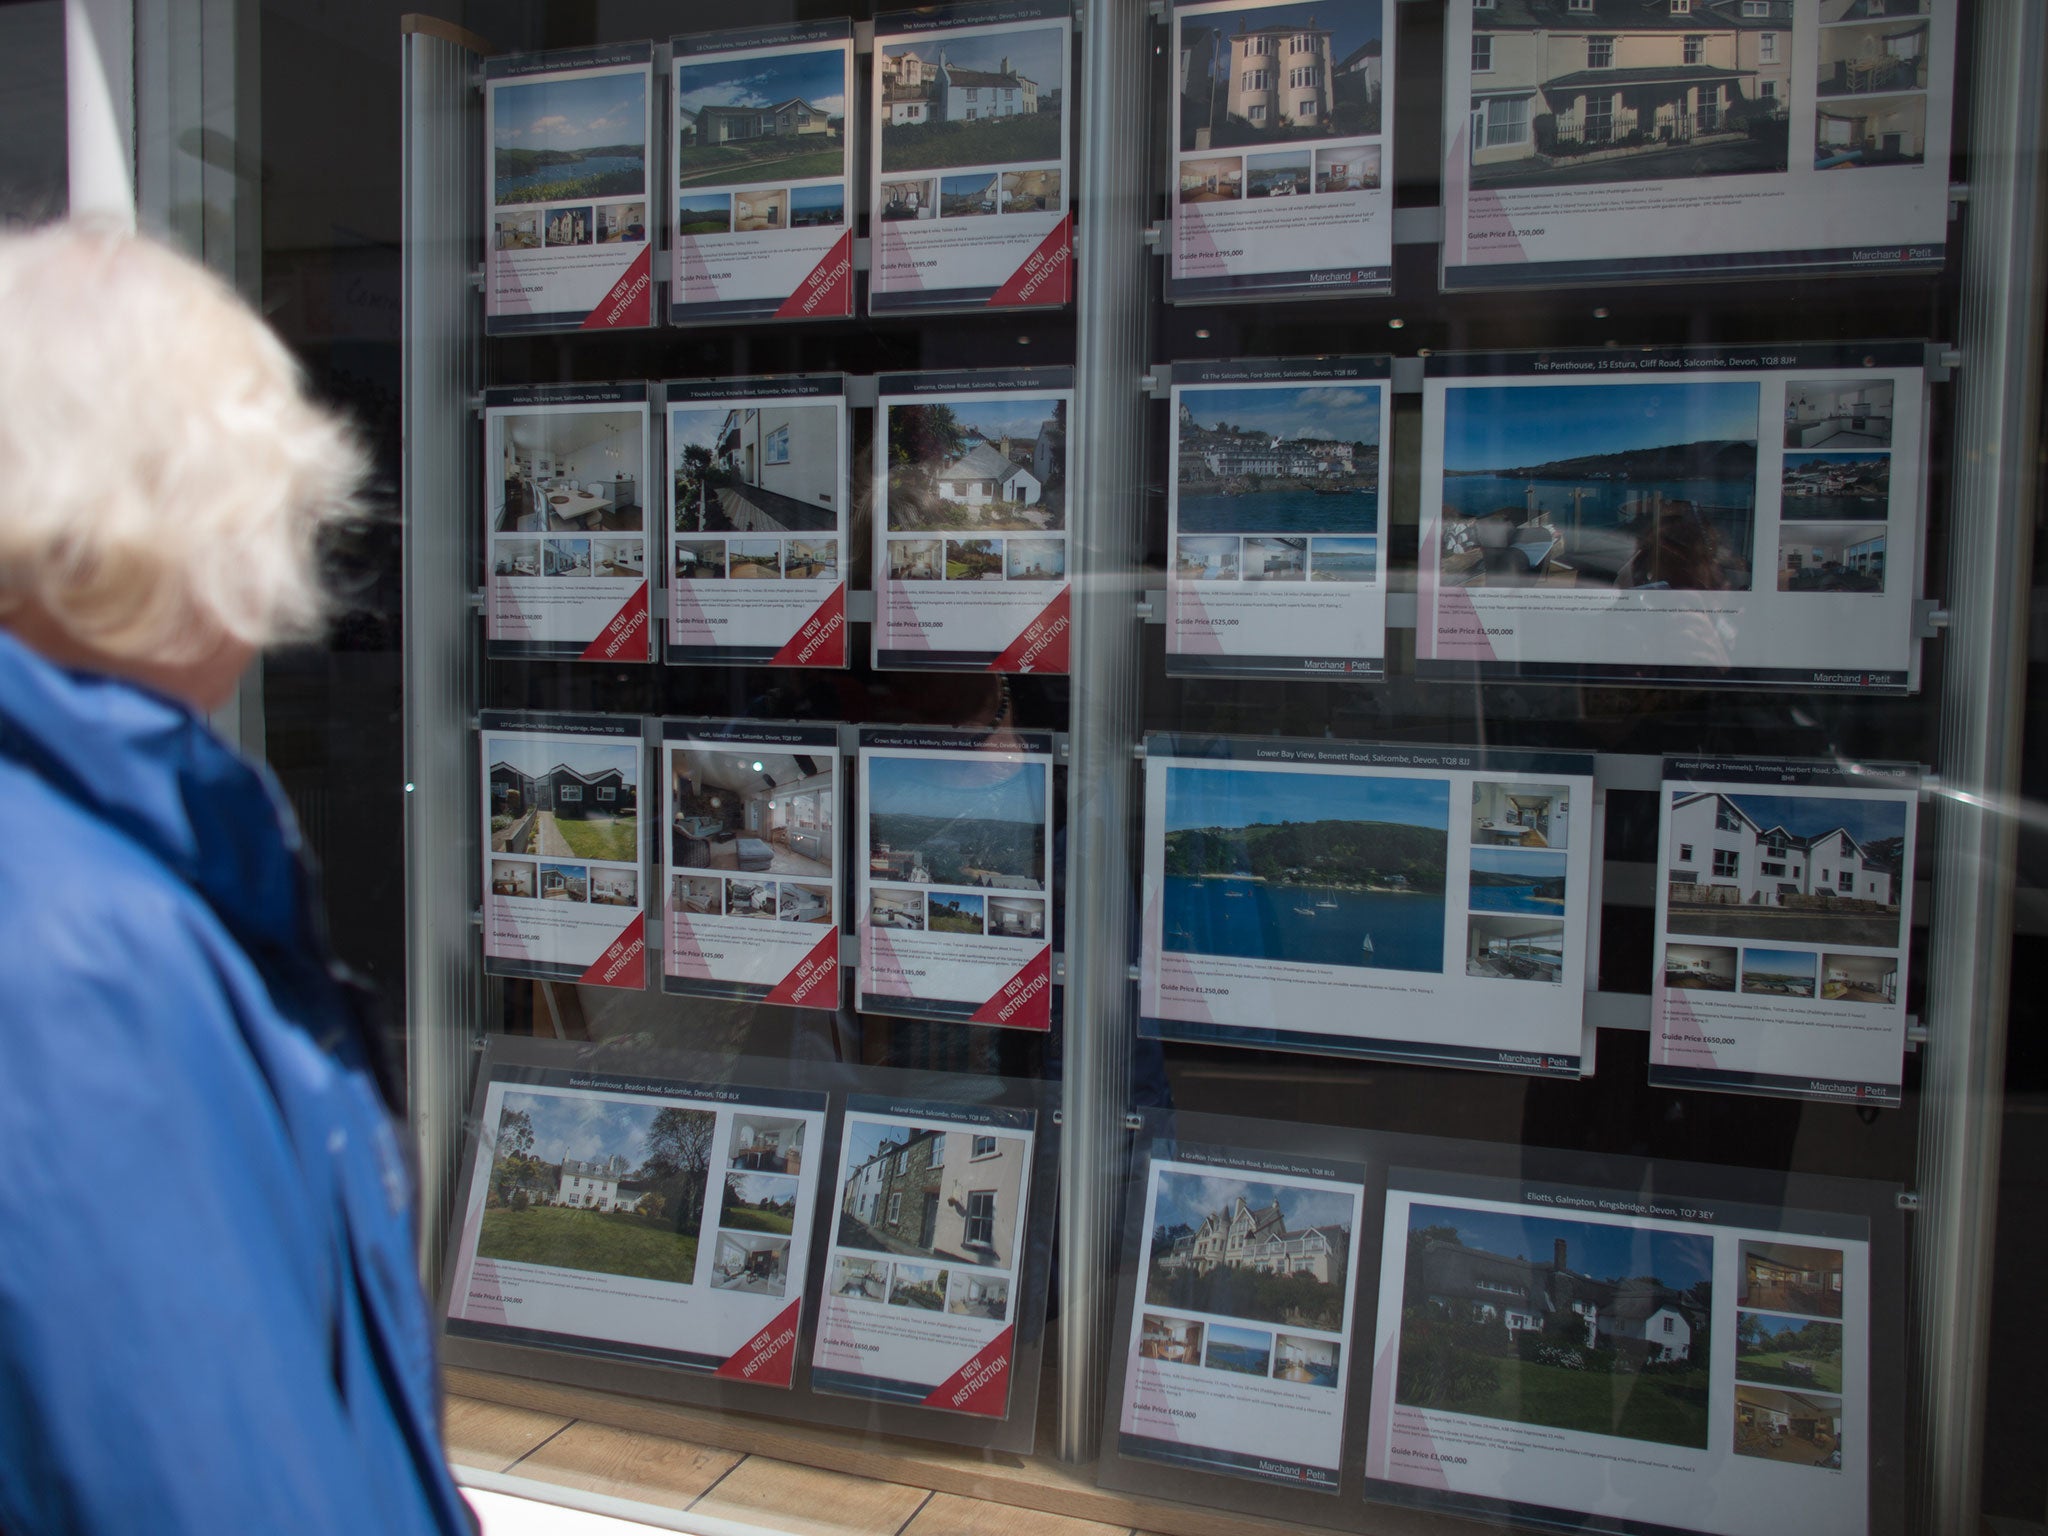 Just this year, annual house prices across the UK increased from 5.5 per cent to 6.1 per cent in September, while private rental prices paid by tenants rose by 2.7per cent annually in the UK, according to the report.